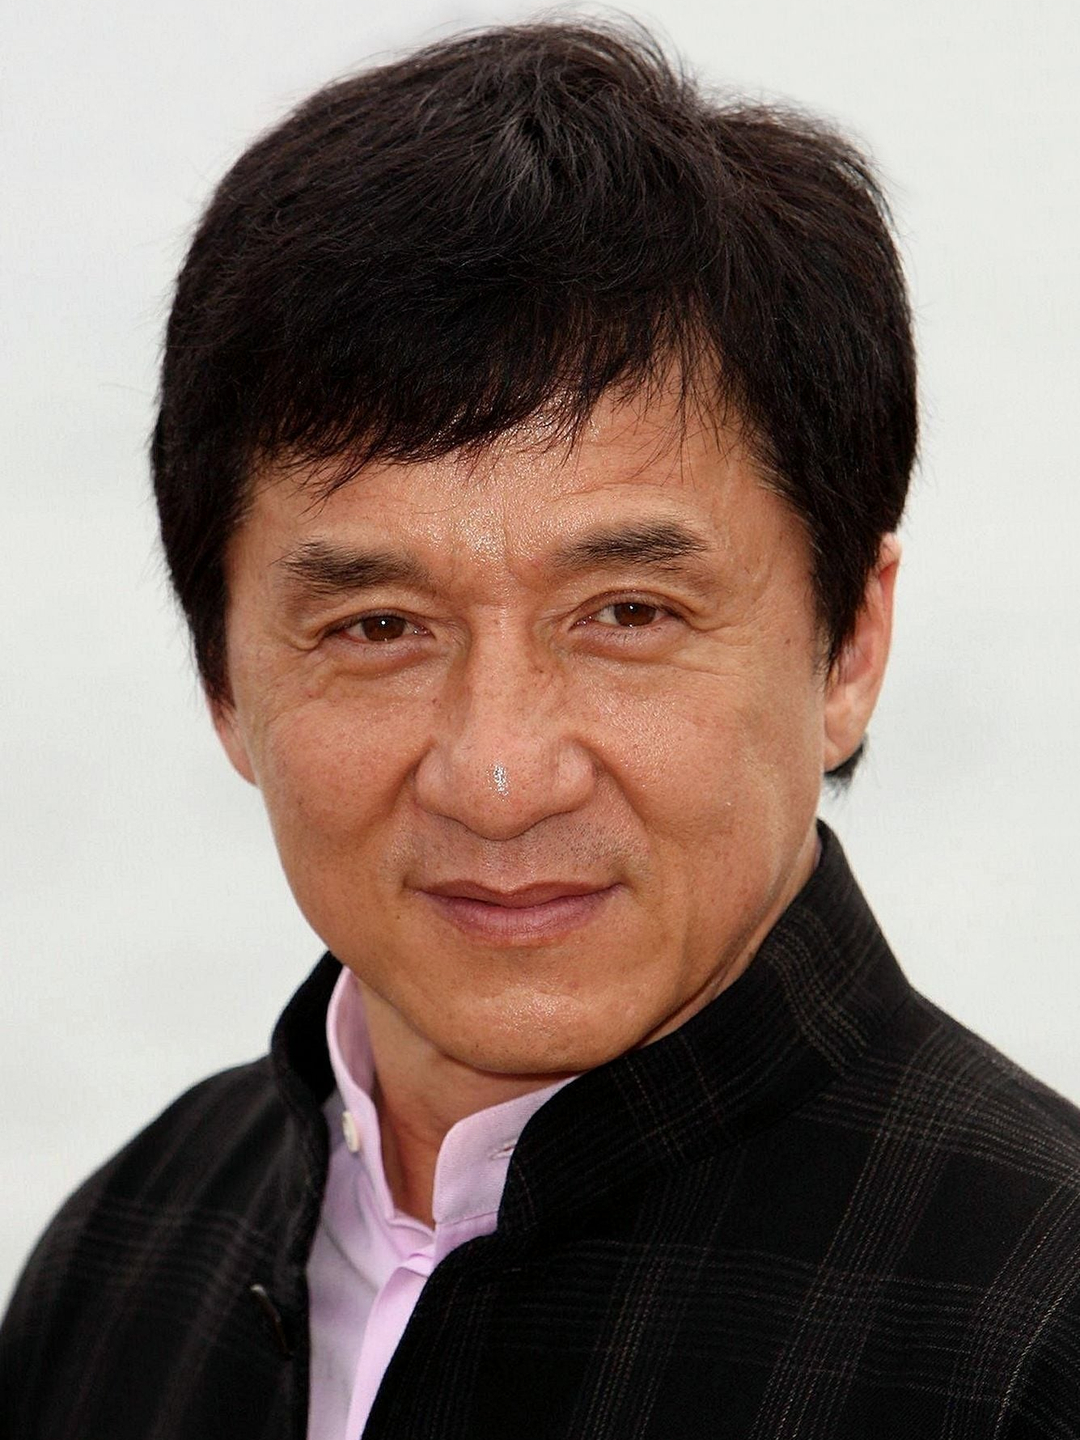 Jackie Chan story of success